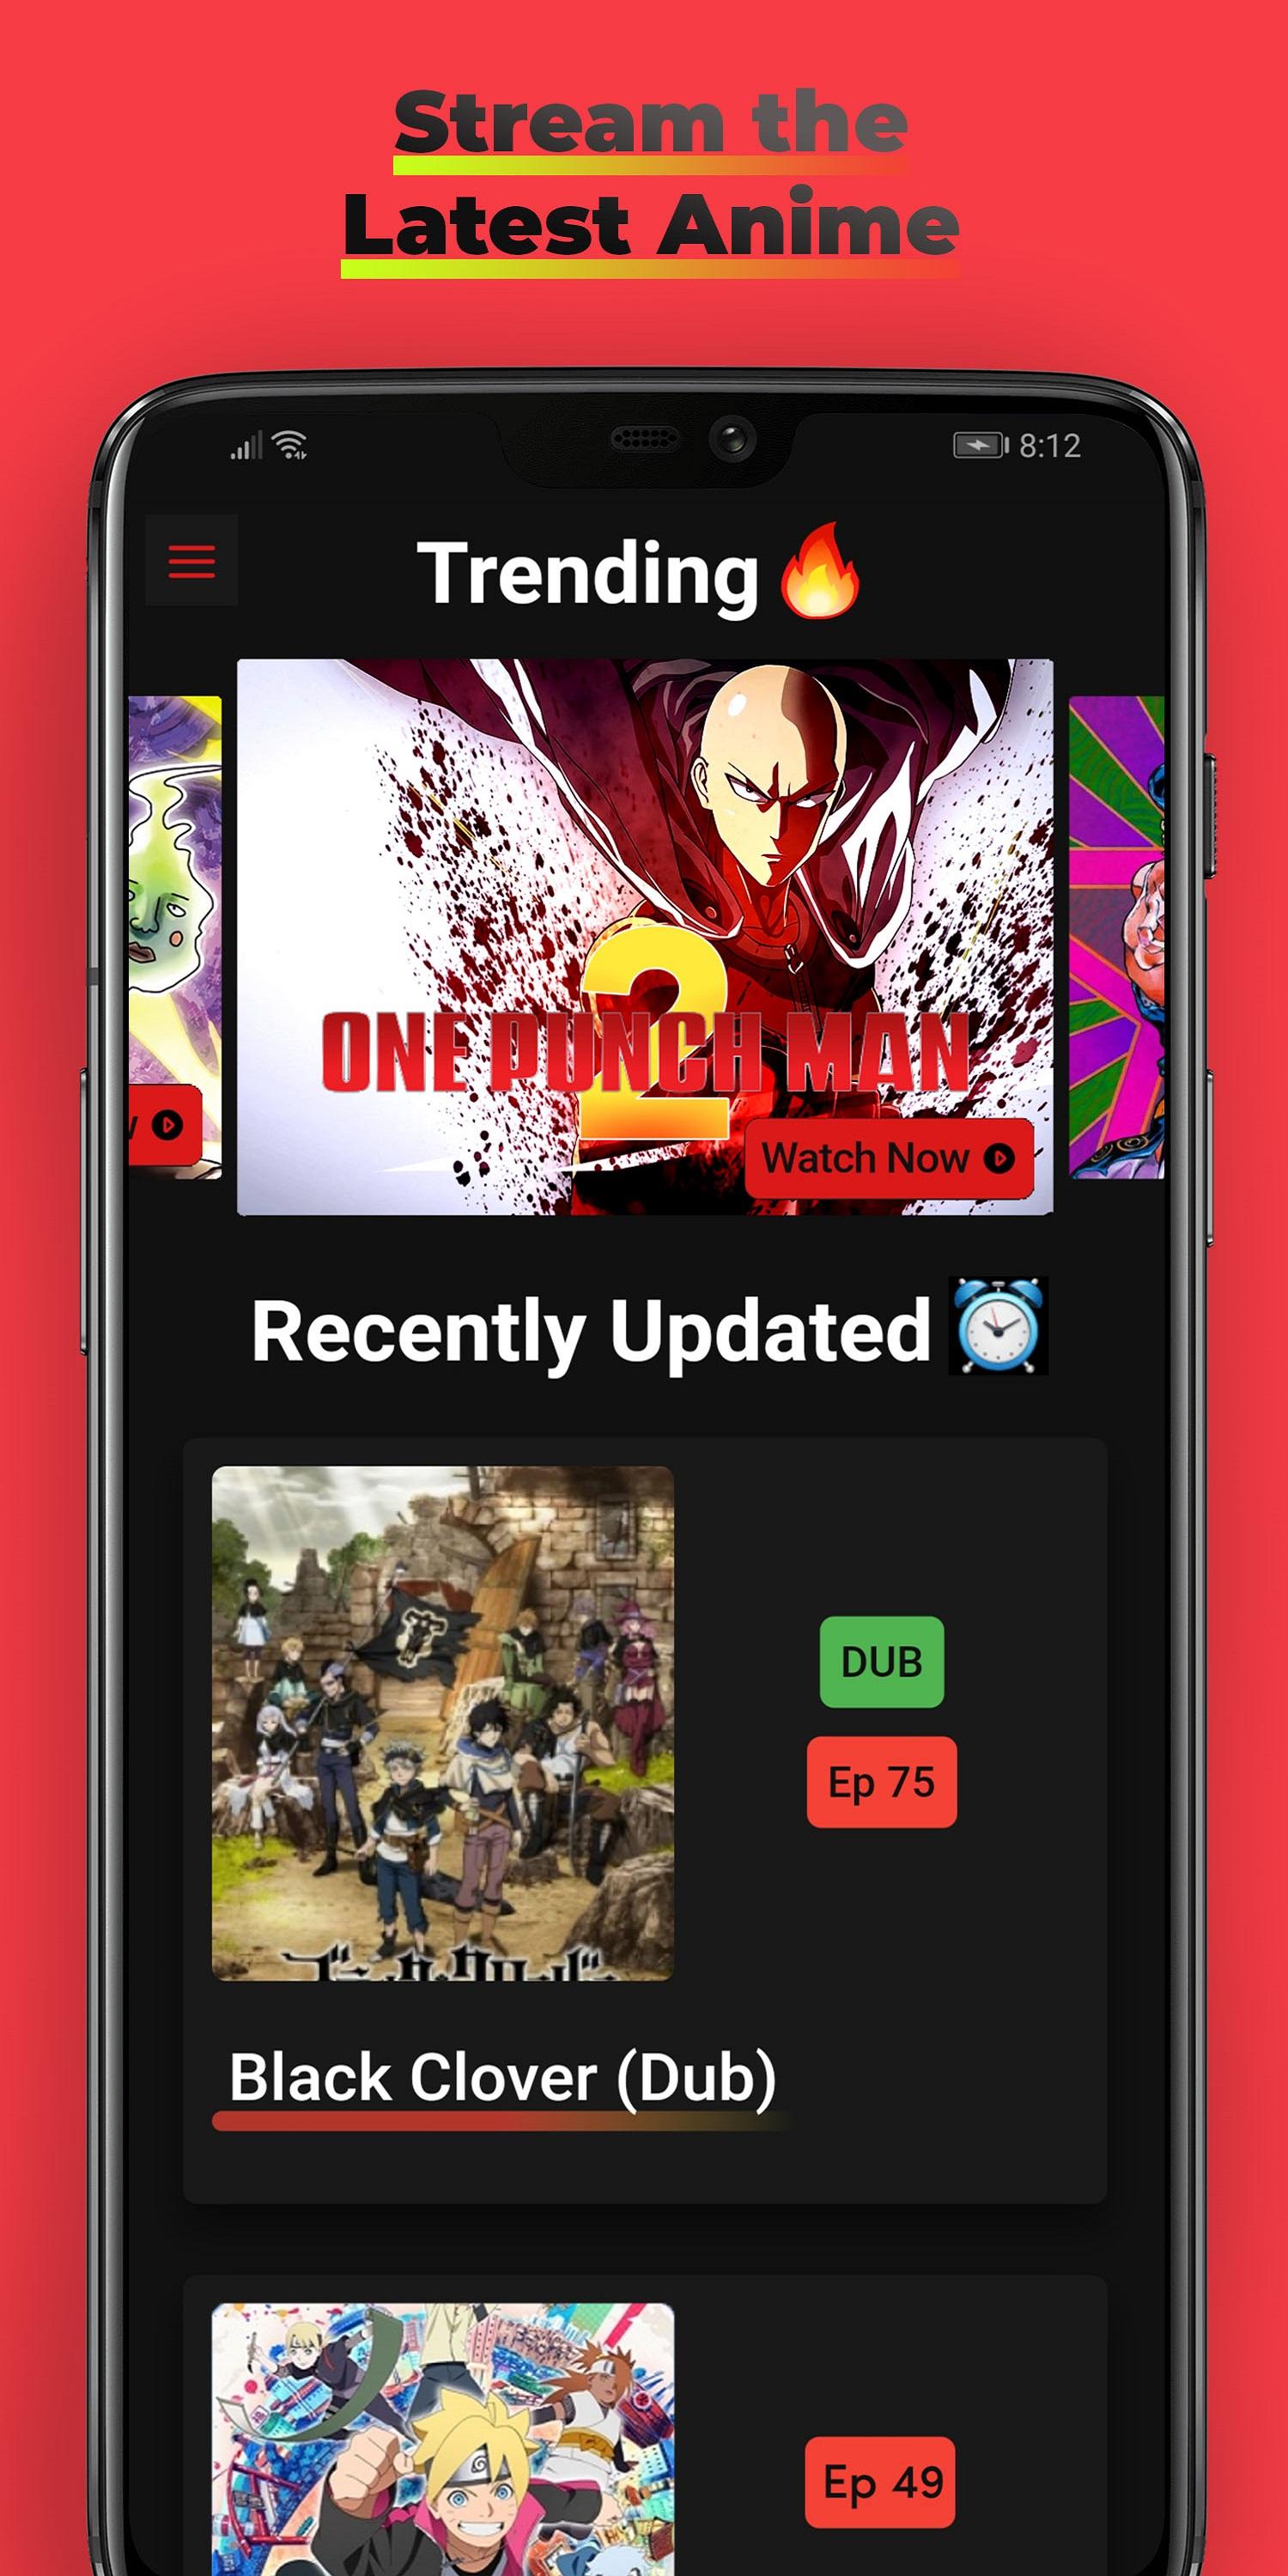 Anime Prime - Watch Anime Free | English SUB & DUB APK  for Android –  Download Anime Prime - Watch Anime Free | English SUB & DUB APK Latest  Version from 